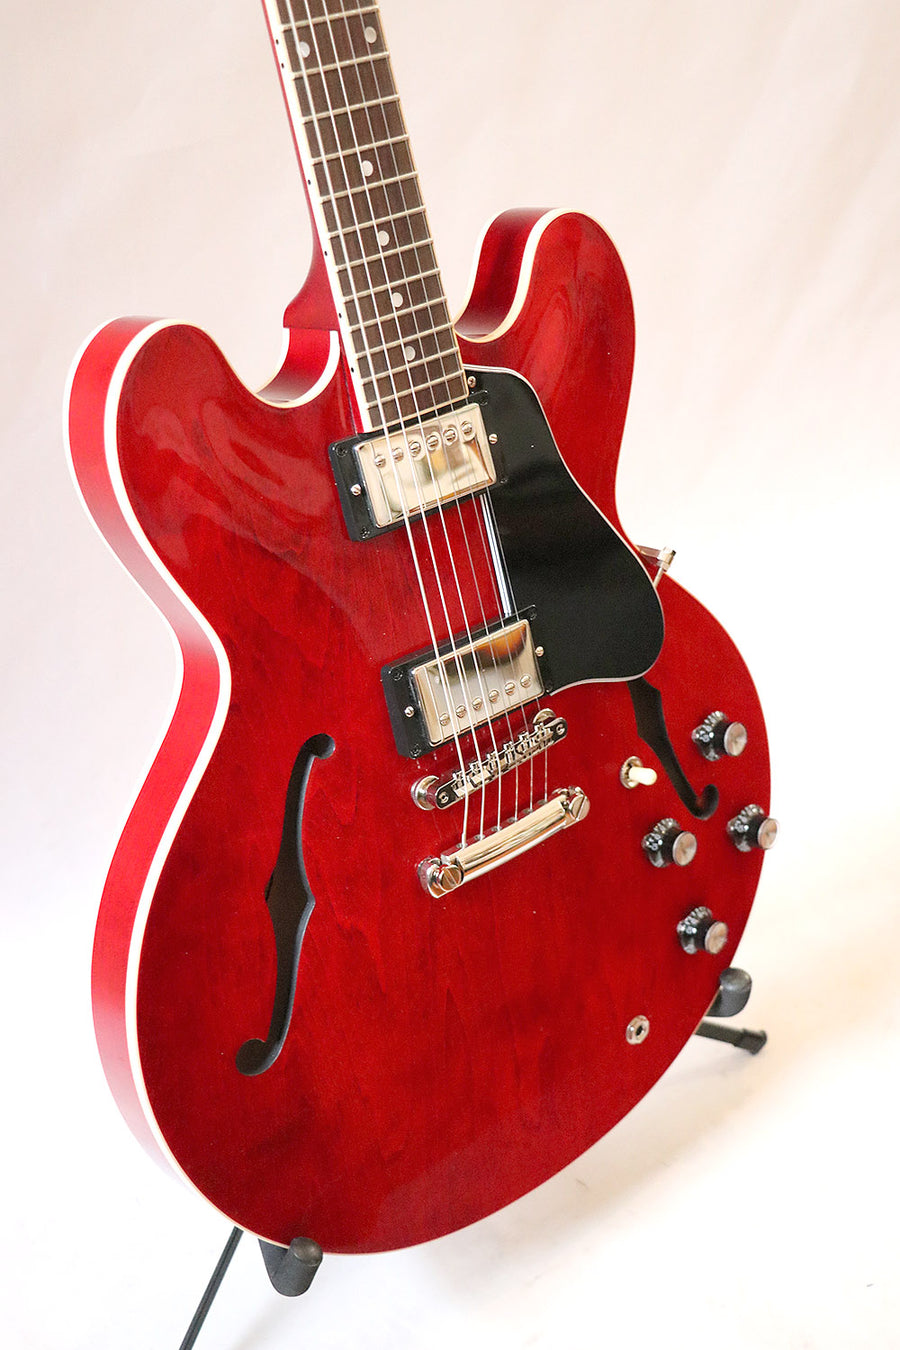 Gibson ES-335 Sixties Cherry 2021 – The Guitar Colonel